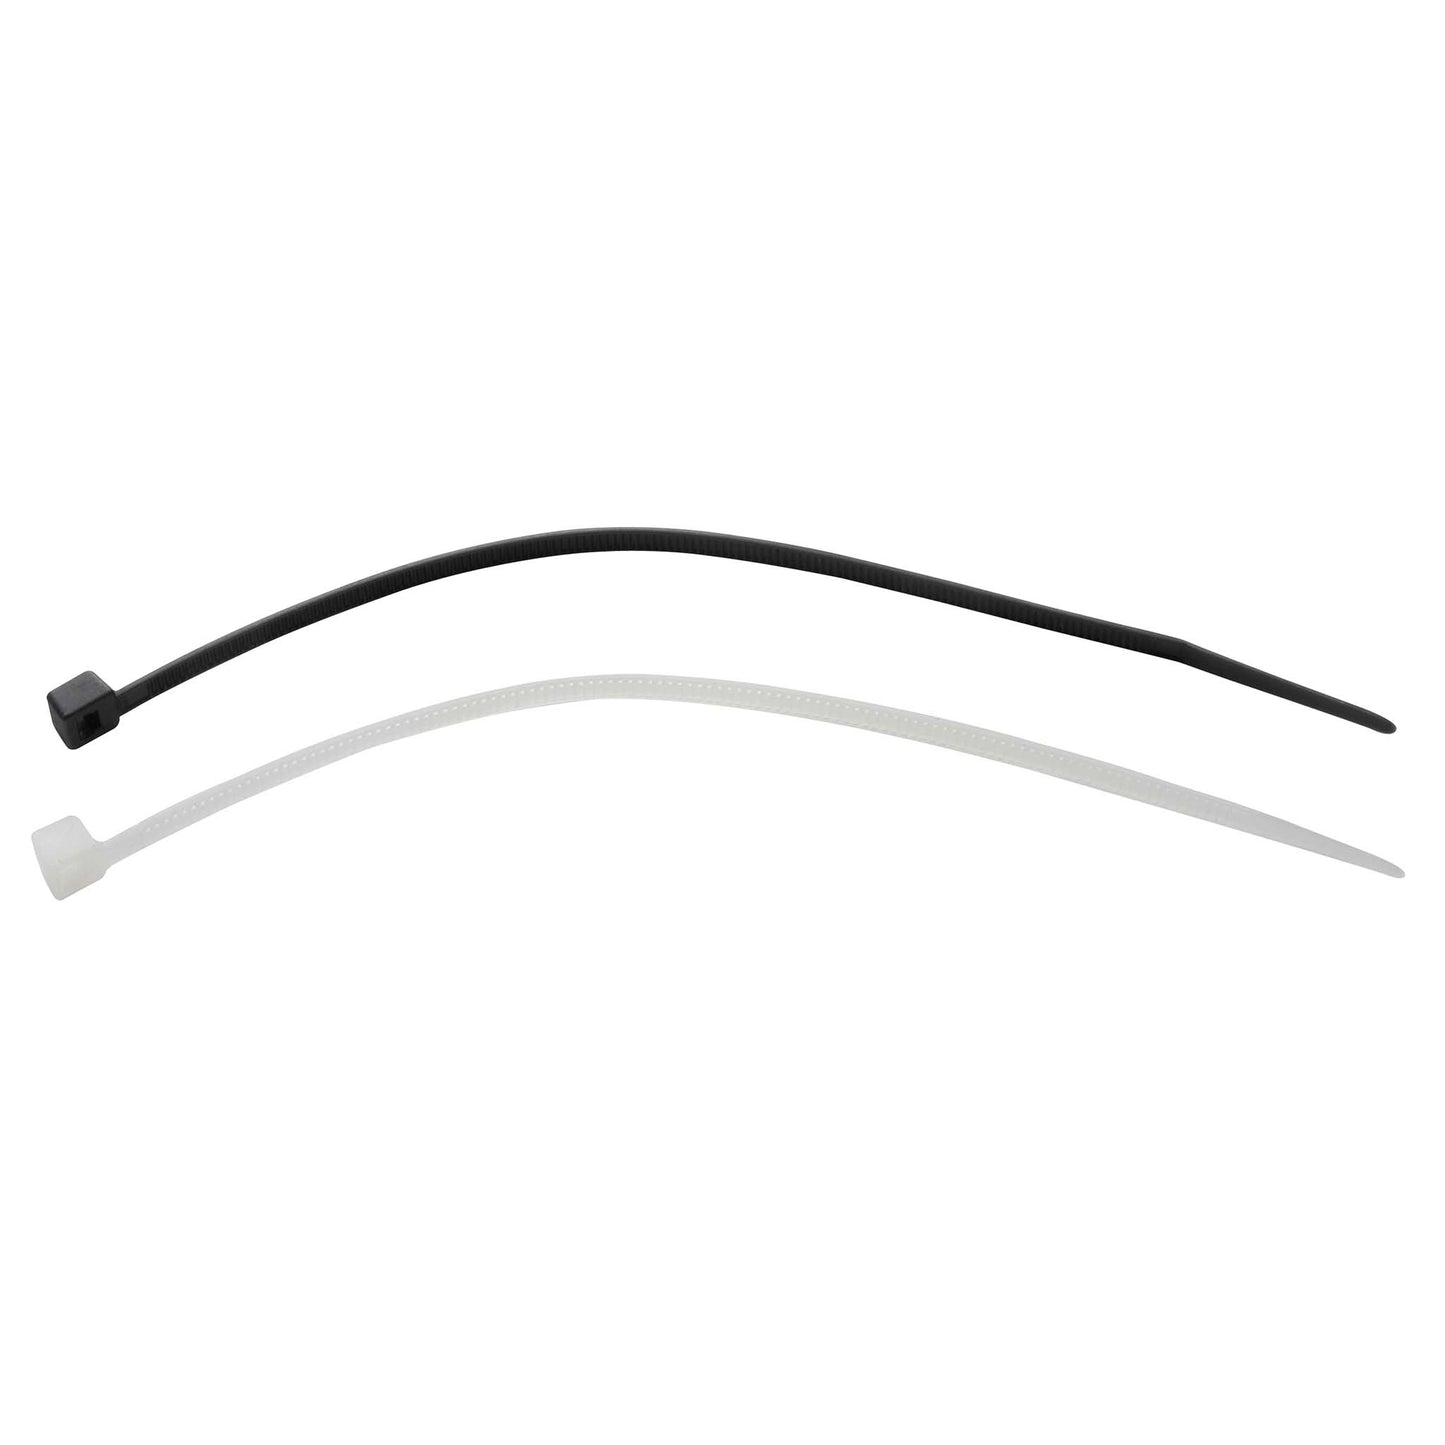 Cable ties 140 x 3.5 mm - transparent